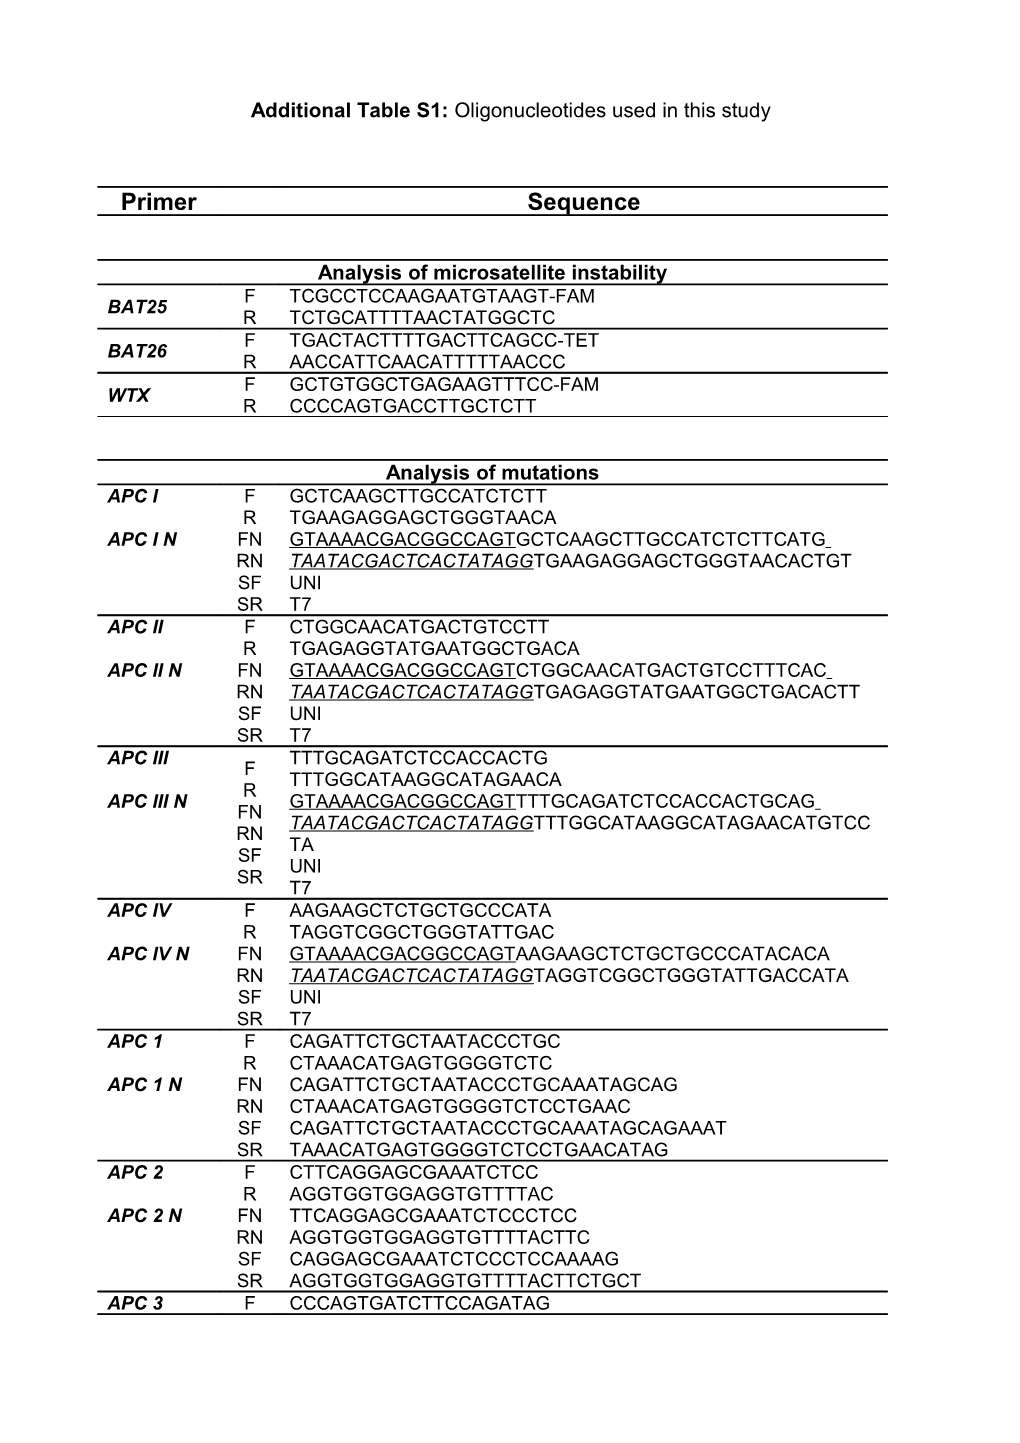 Additional Table S1: Oligonucleotides Used in This Study